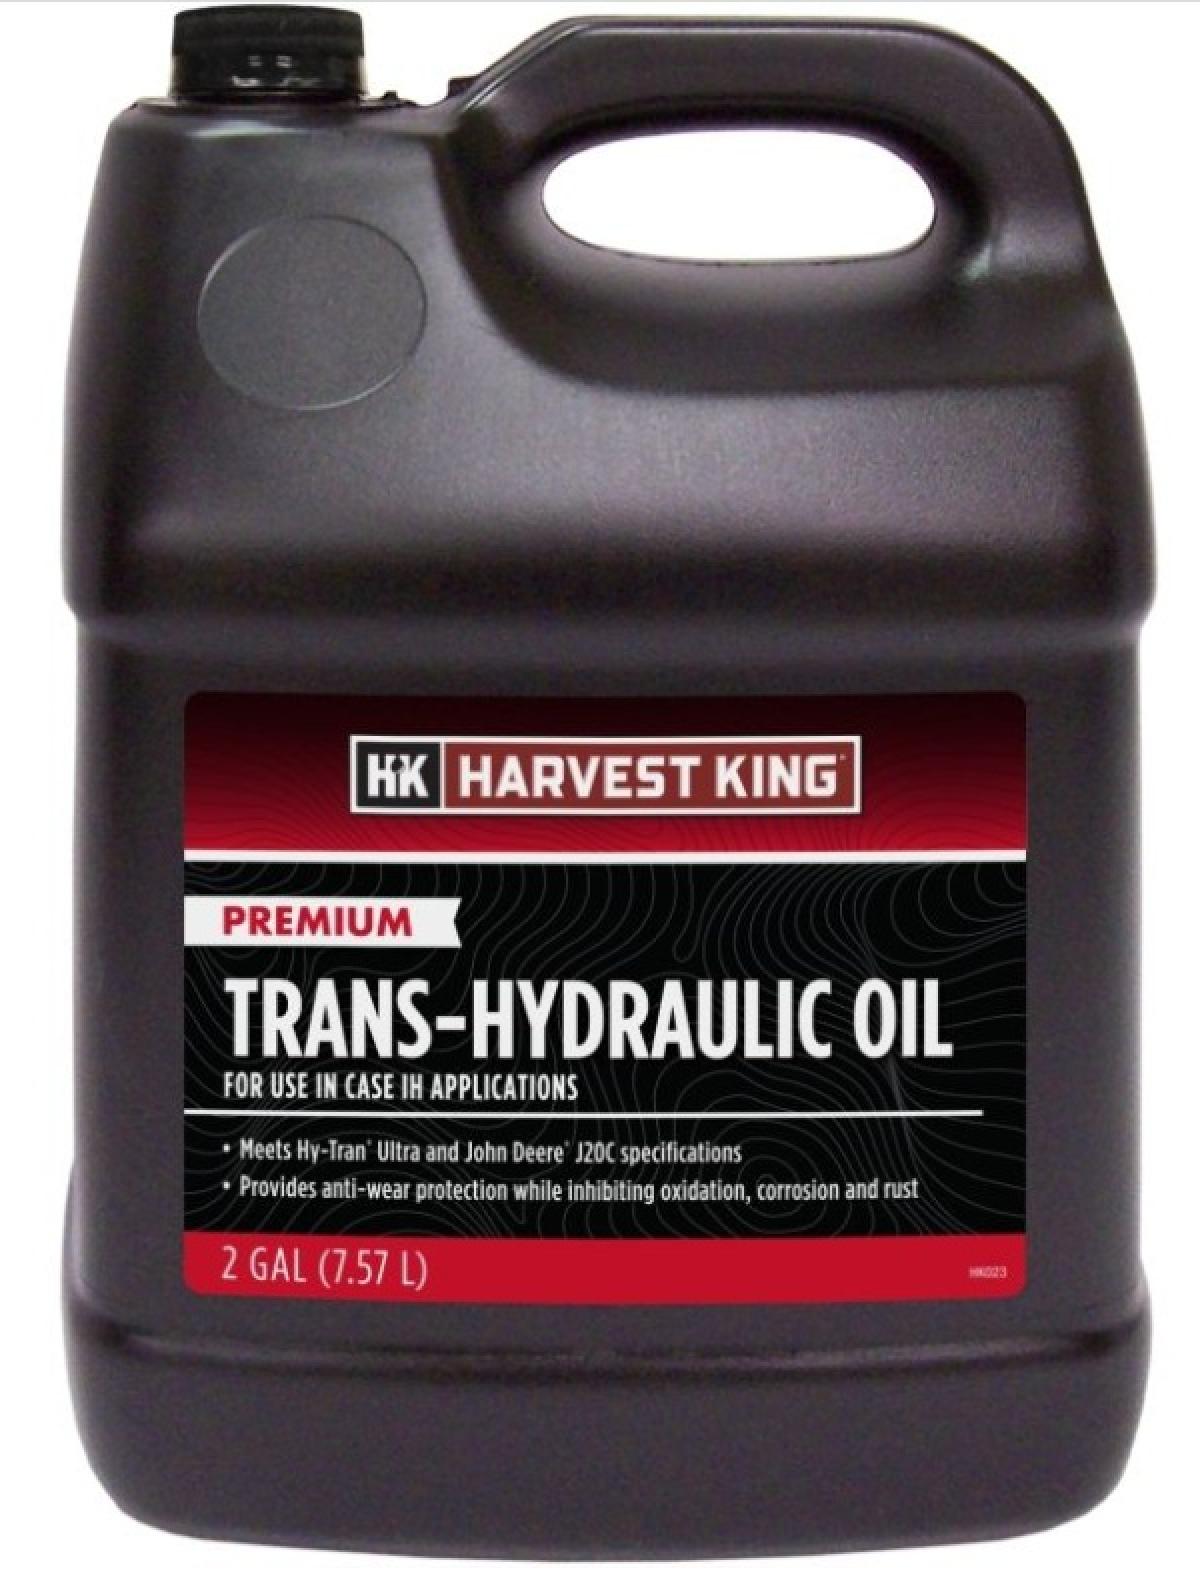 Harvest King Trans-Hydraulic Oil for Case IH